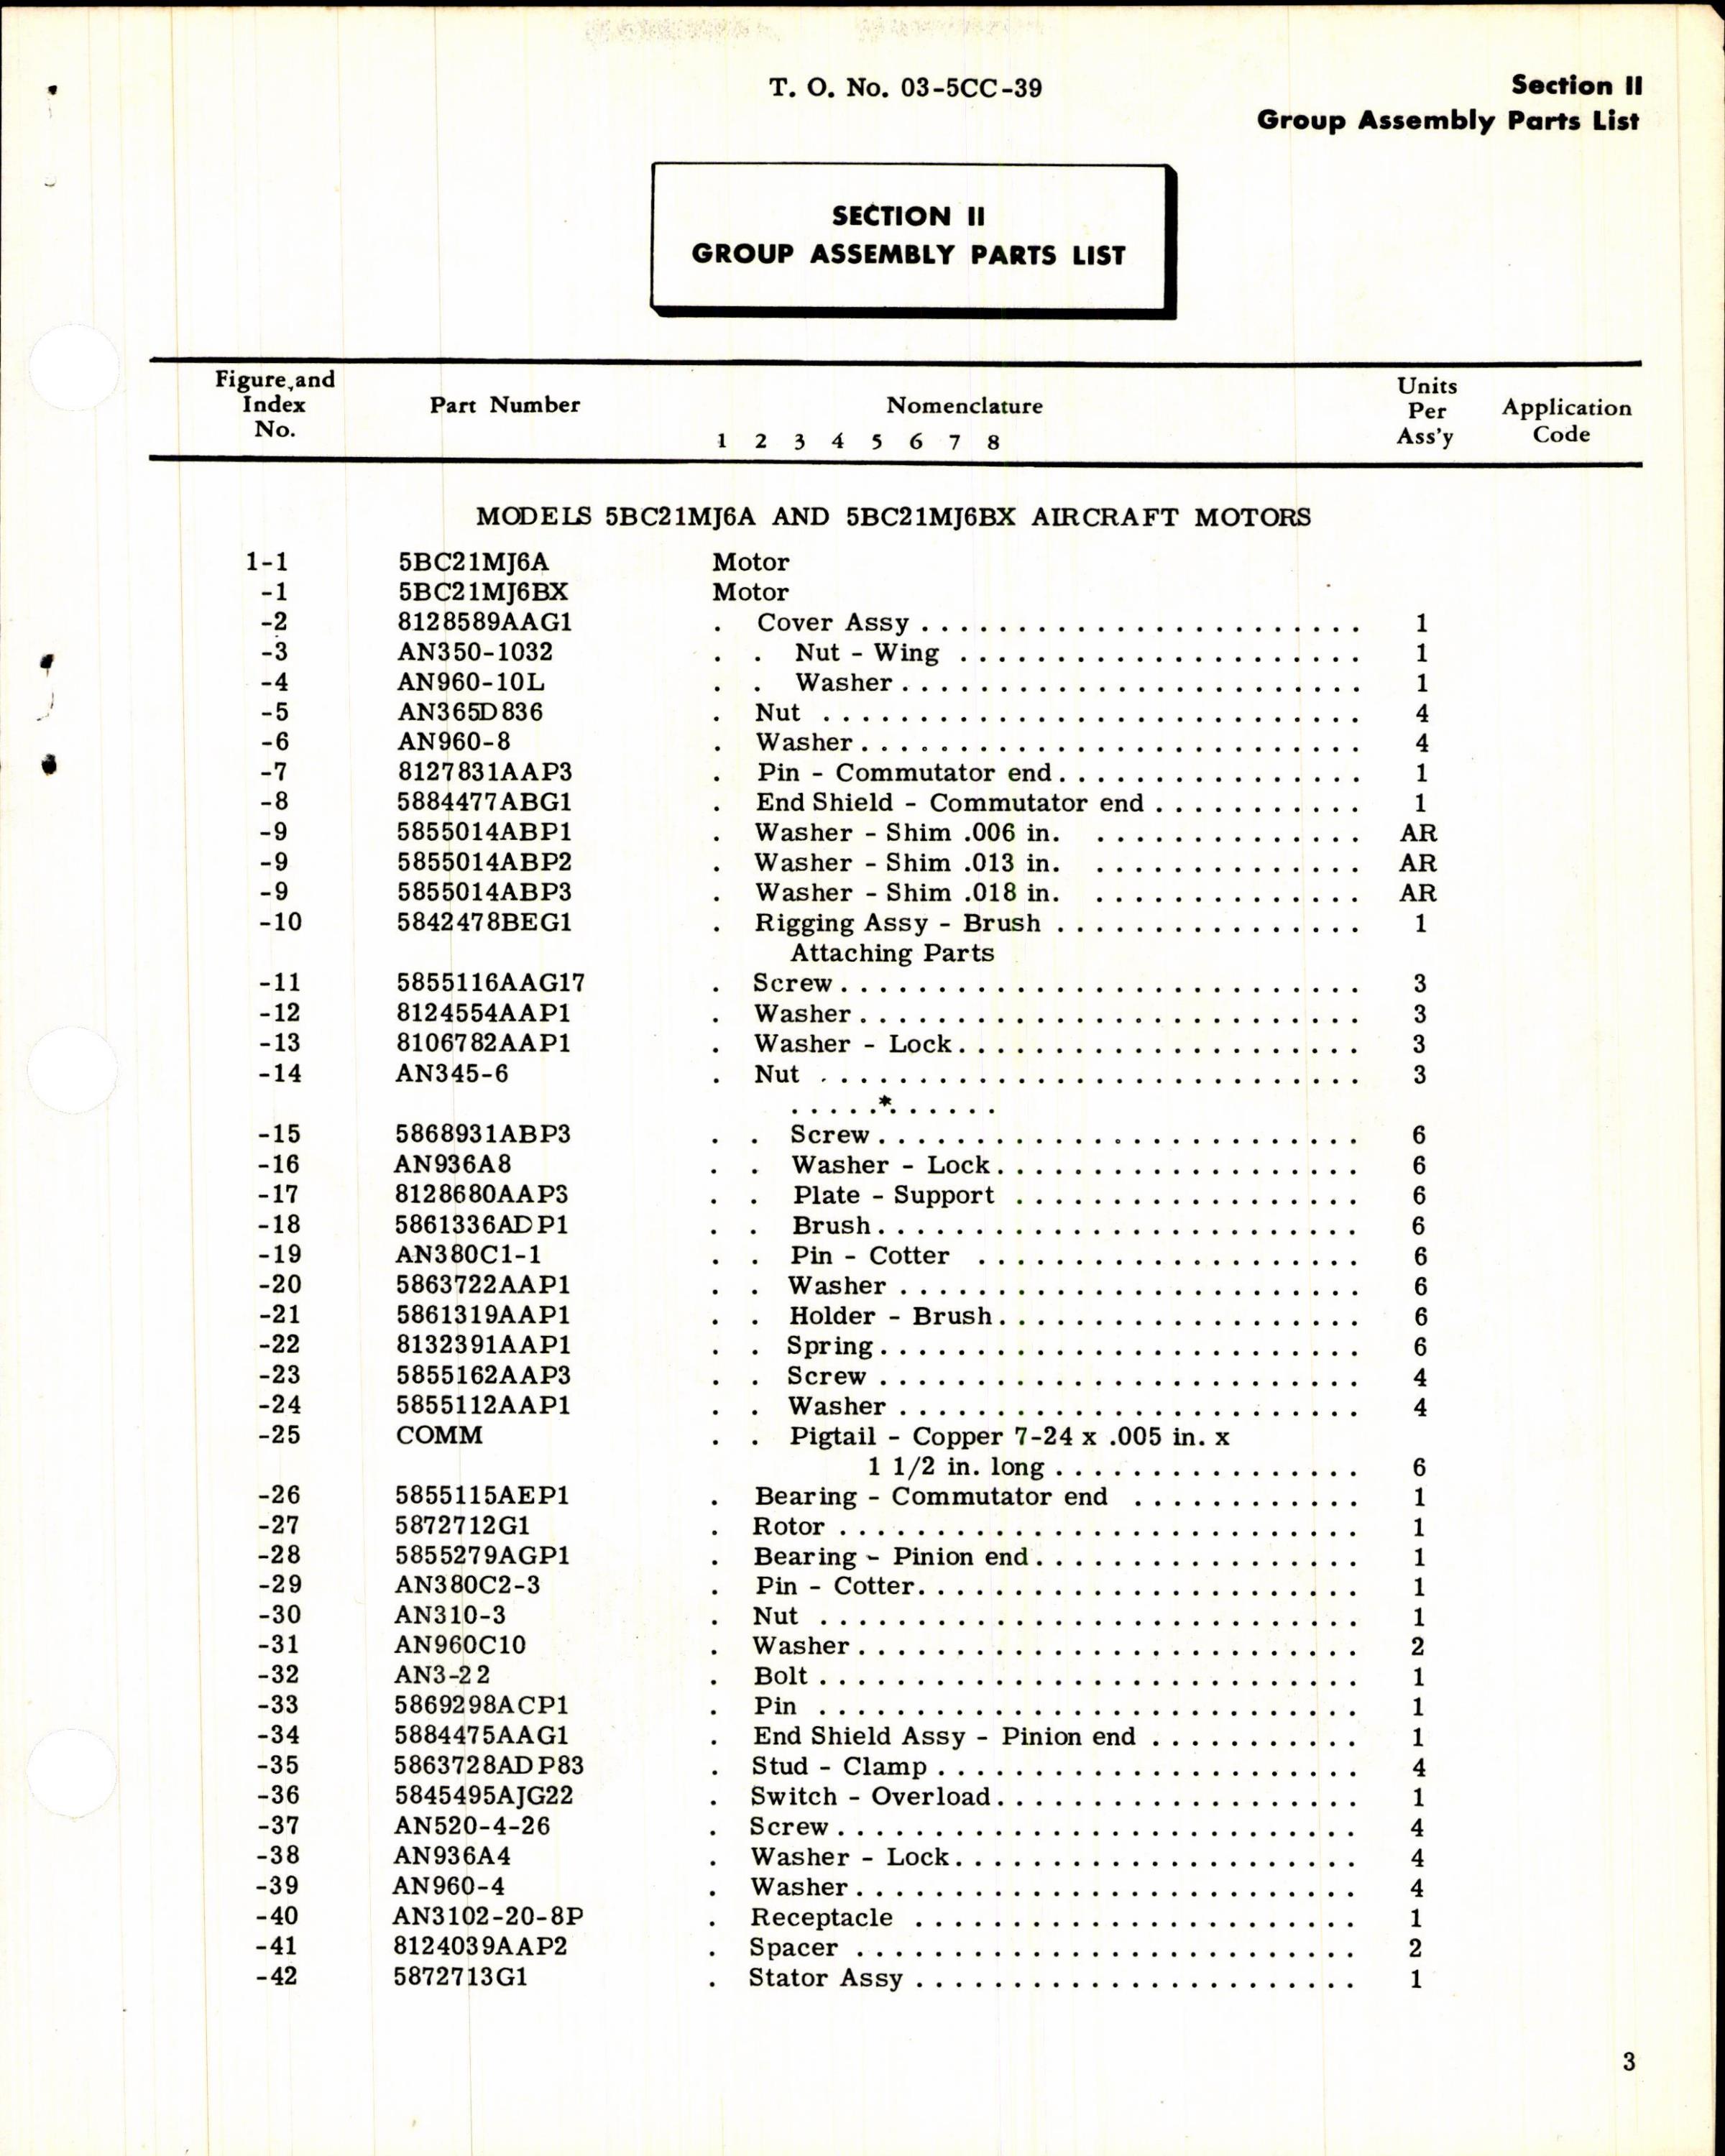 Sample page 5 from AirCorps Library document: Parts Catalog for General Electric Aircraft Motors, Series 5BC21